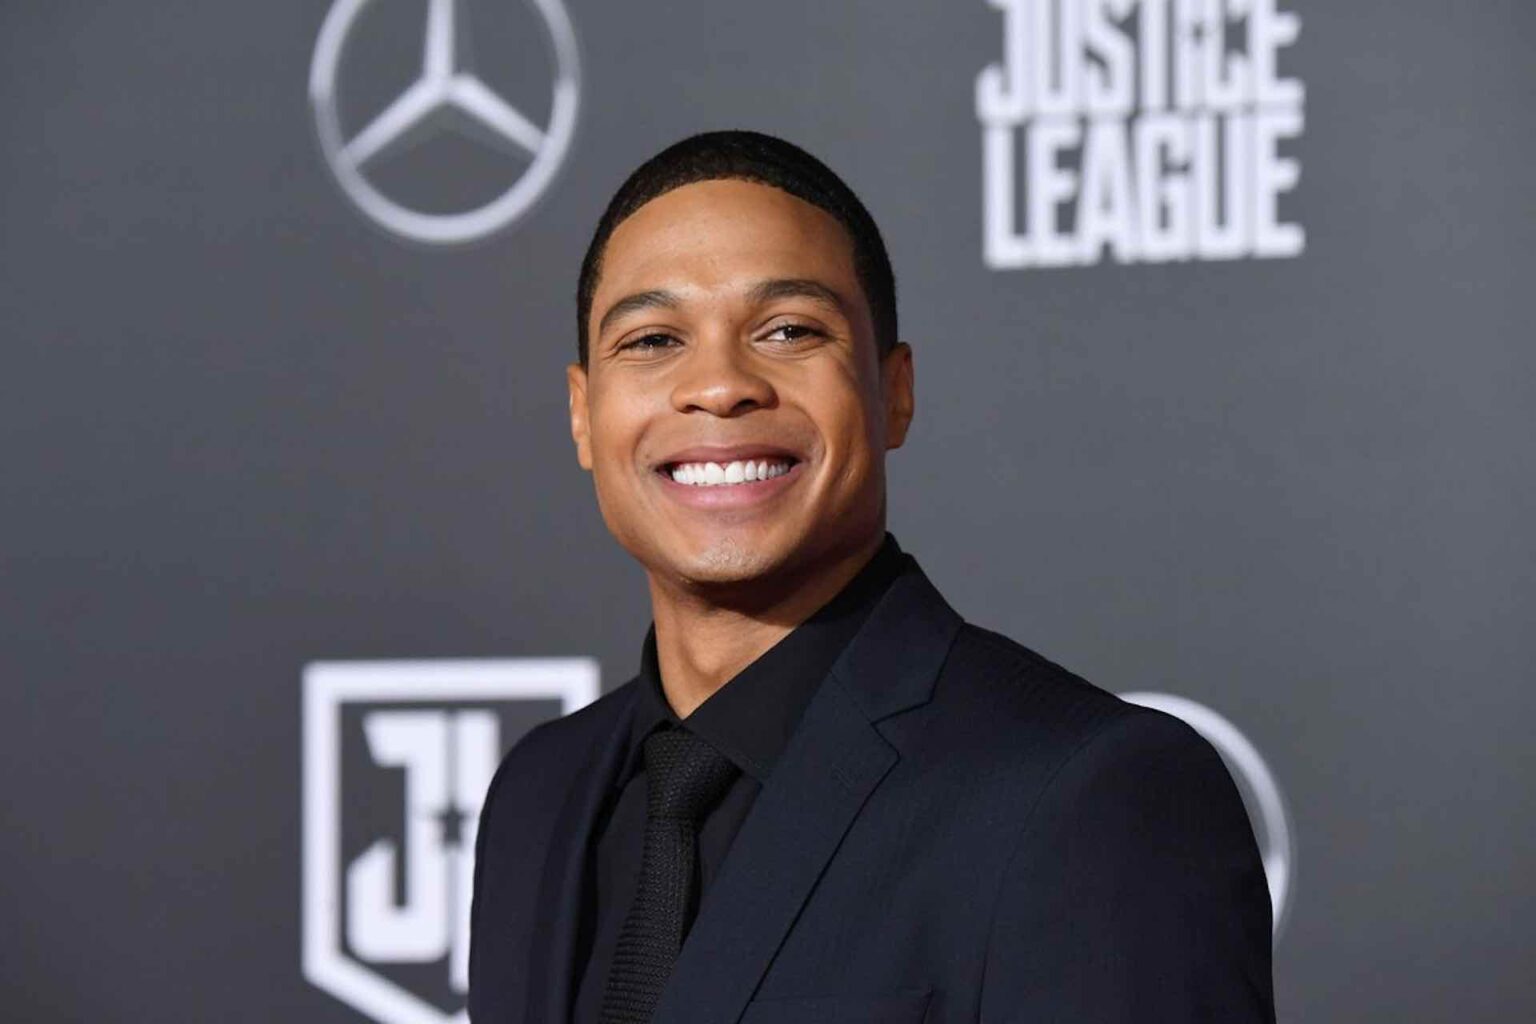 According to actor Ray Fisher (Cyborg), the quality of 'Justice League' wasn’t the only problem. Here's what went wrong with the production.